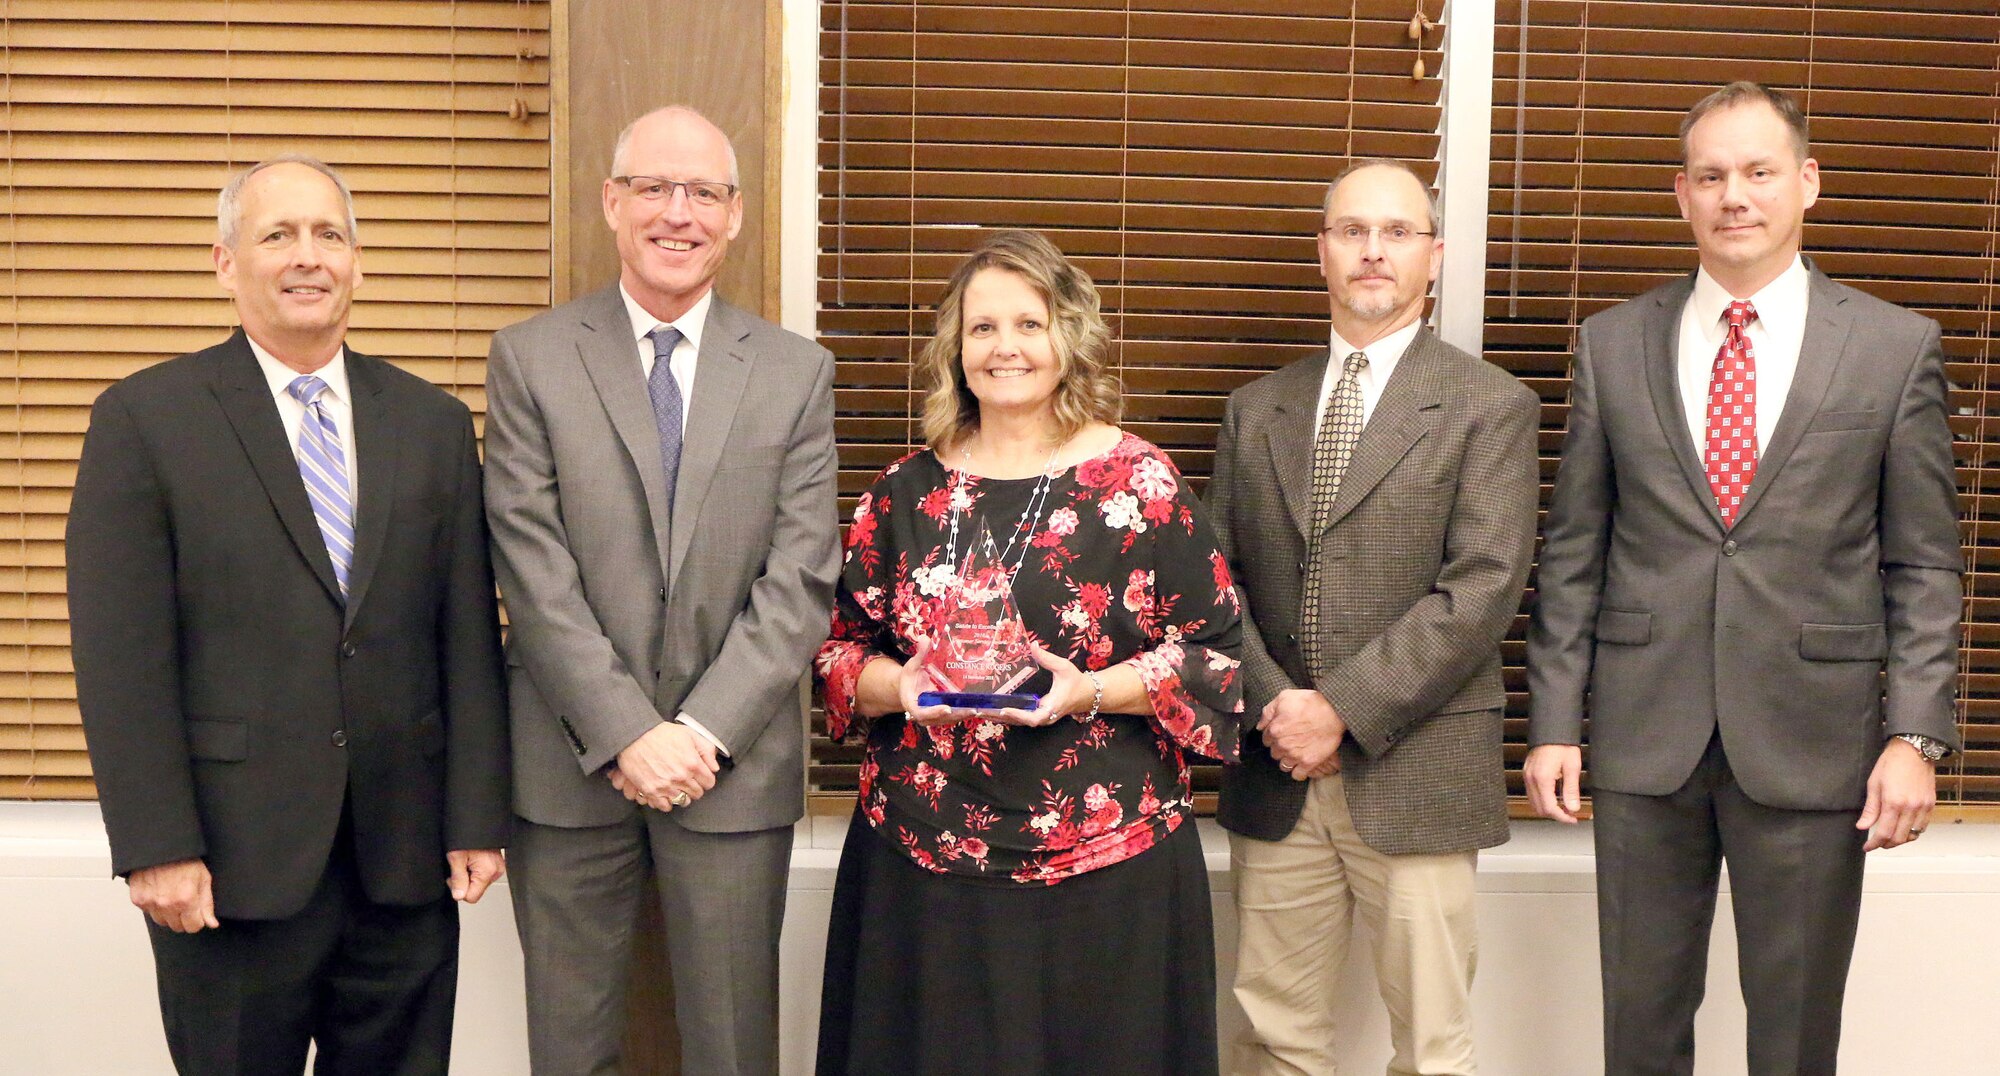 Technical Specialist Constance Rogers (third from left) receives the Customer Service Excellence Award during the National Aerospace Solutions, LLC Salute to Excellence Annual Award Ceremony Nov. 14, 2018, at the Arnold Lakeside Center, Arnold Air Force Base, Tenn. Also pictured from left is NAS Deputy General Manager Michael Belzil, NAS General Manager Richard Tighe, Chugach Base Operations - Utilities Manager Michael Harvey and NAS Business Services Director Chris Baker. (U.S. Air Force photo by Bradley Hicks)